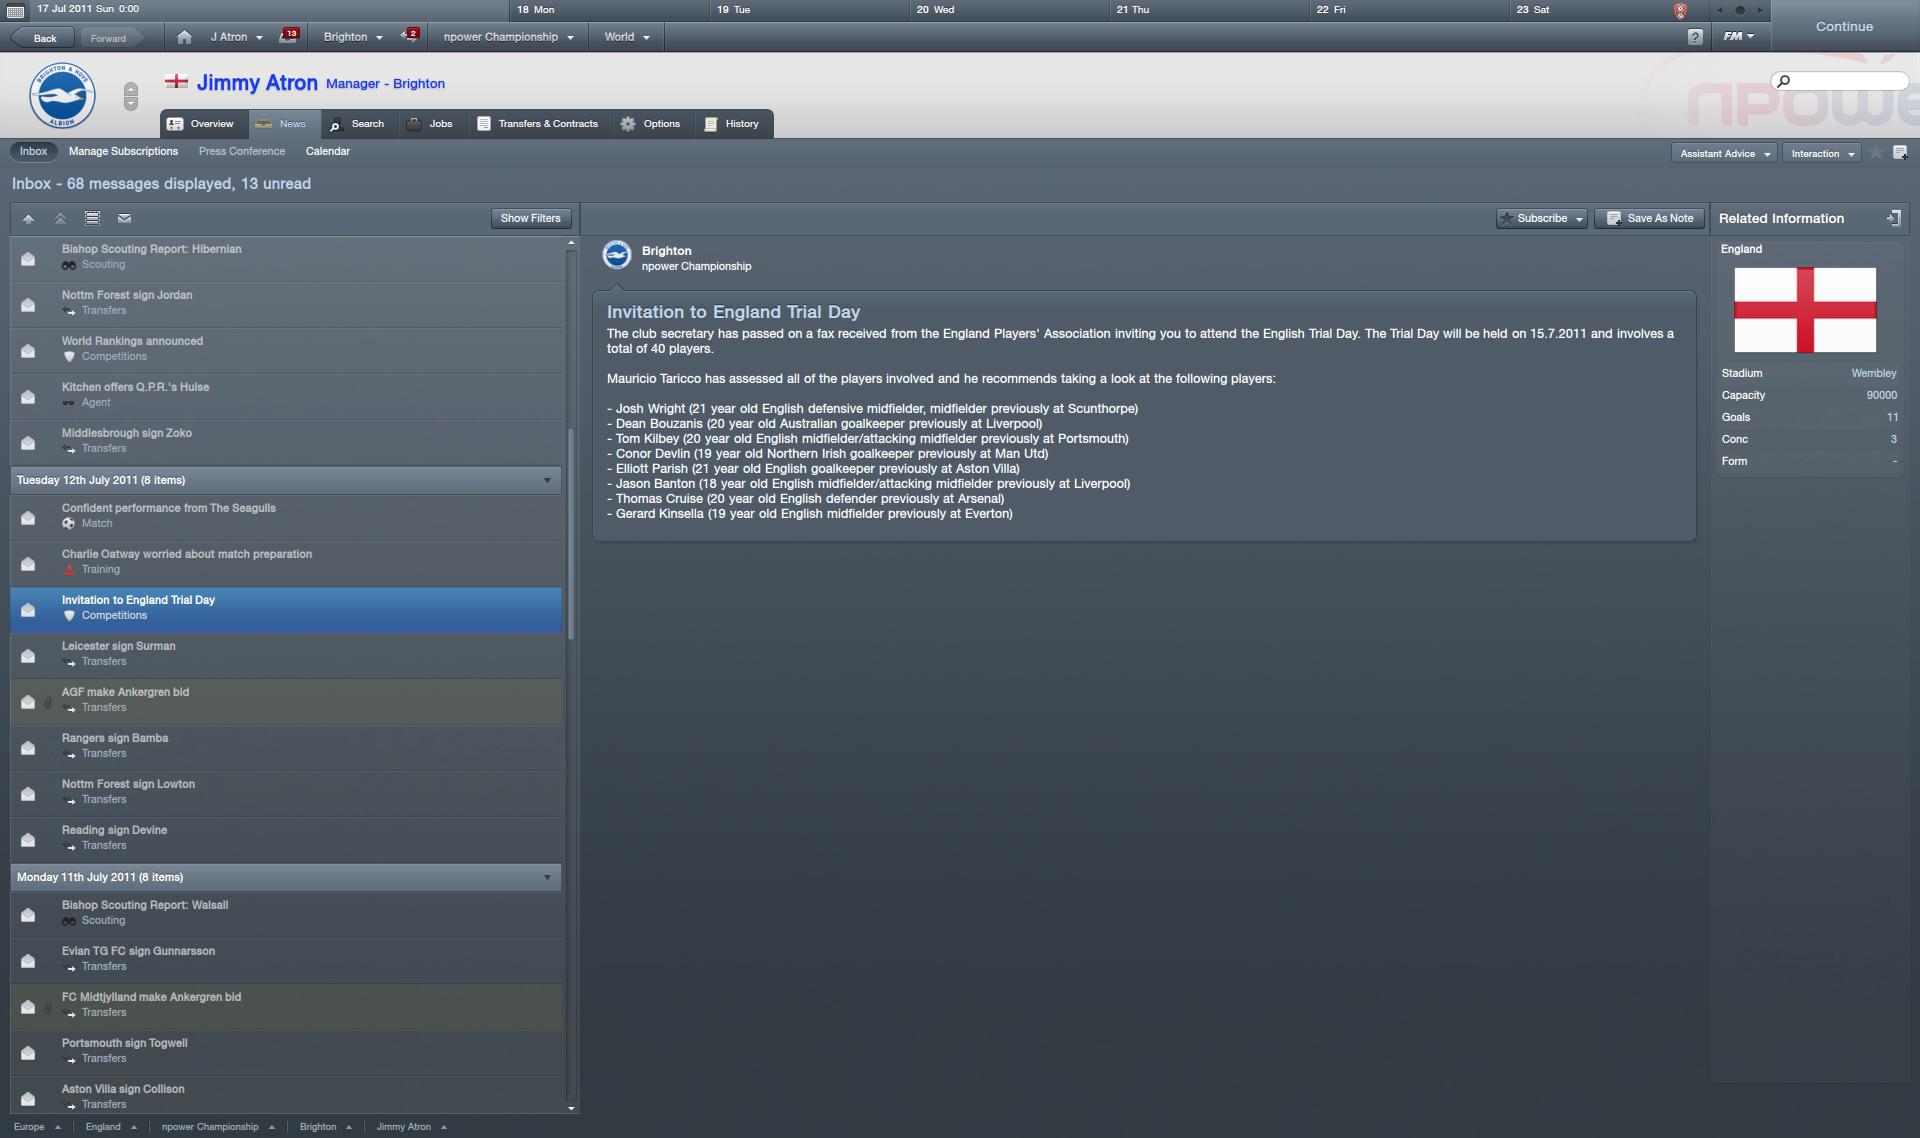 Football Manager 2012 6191719540_8ac432d8f8_o